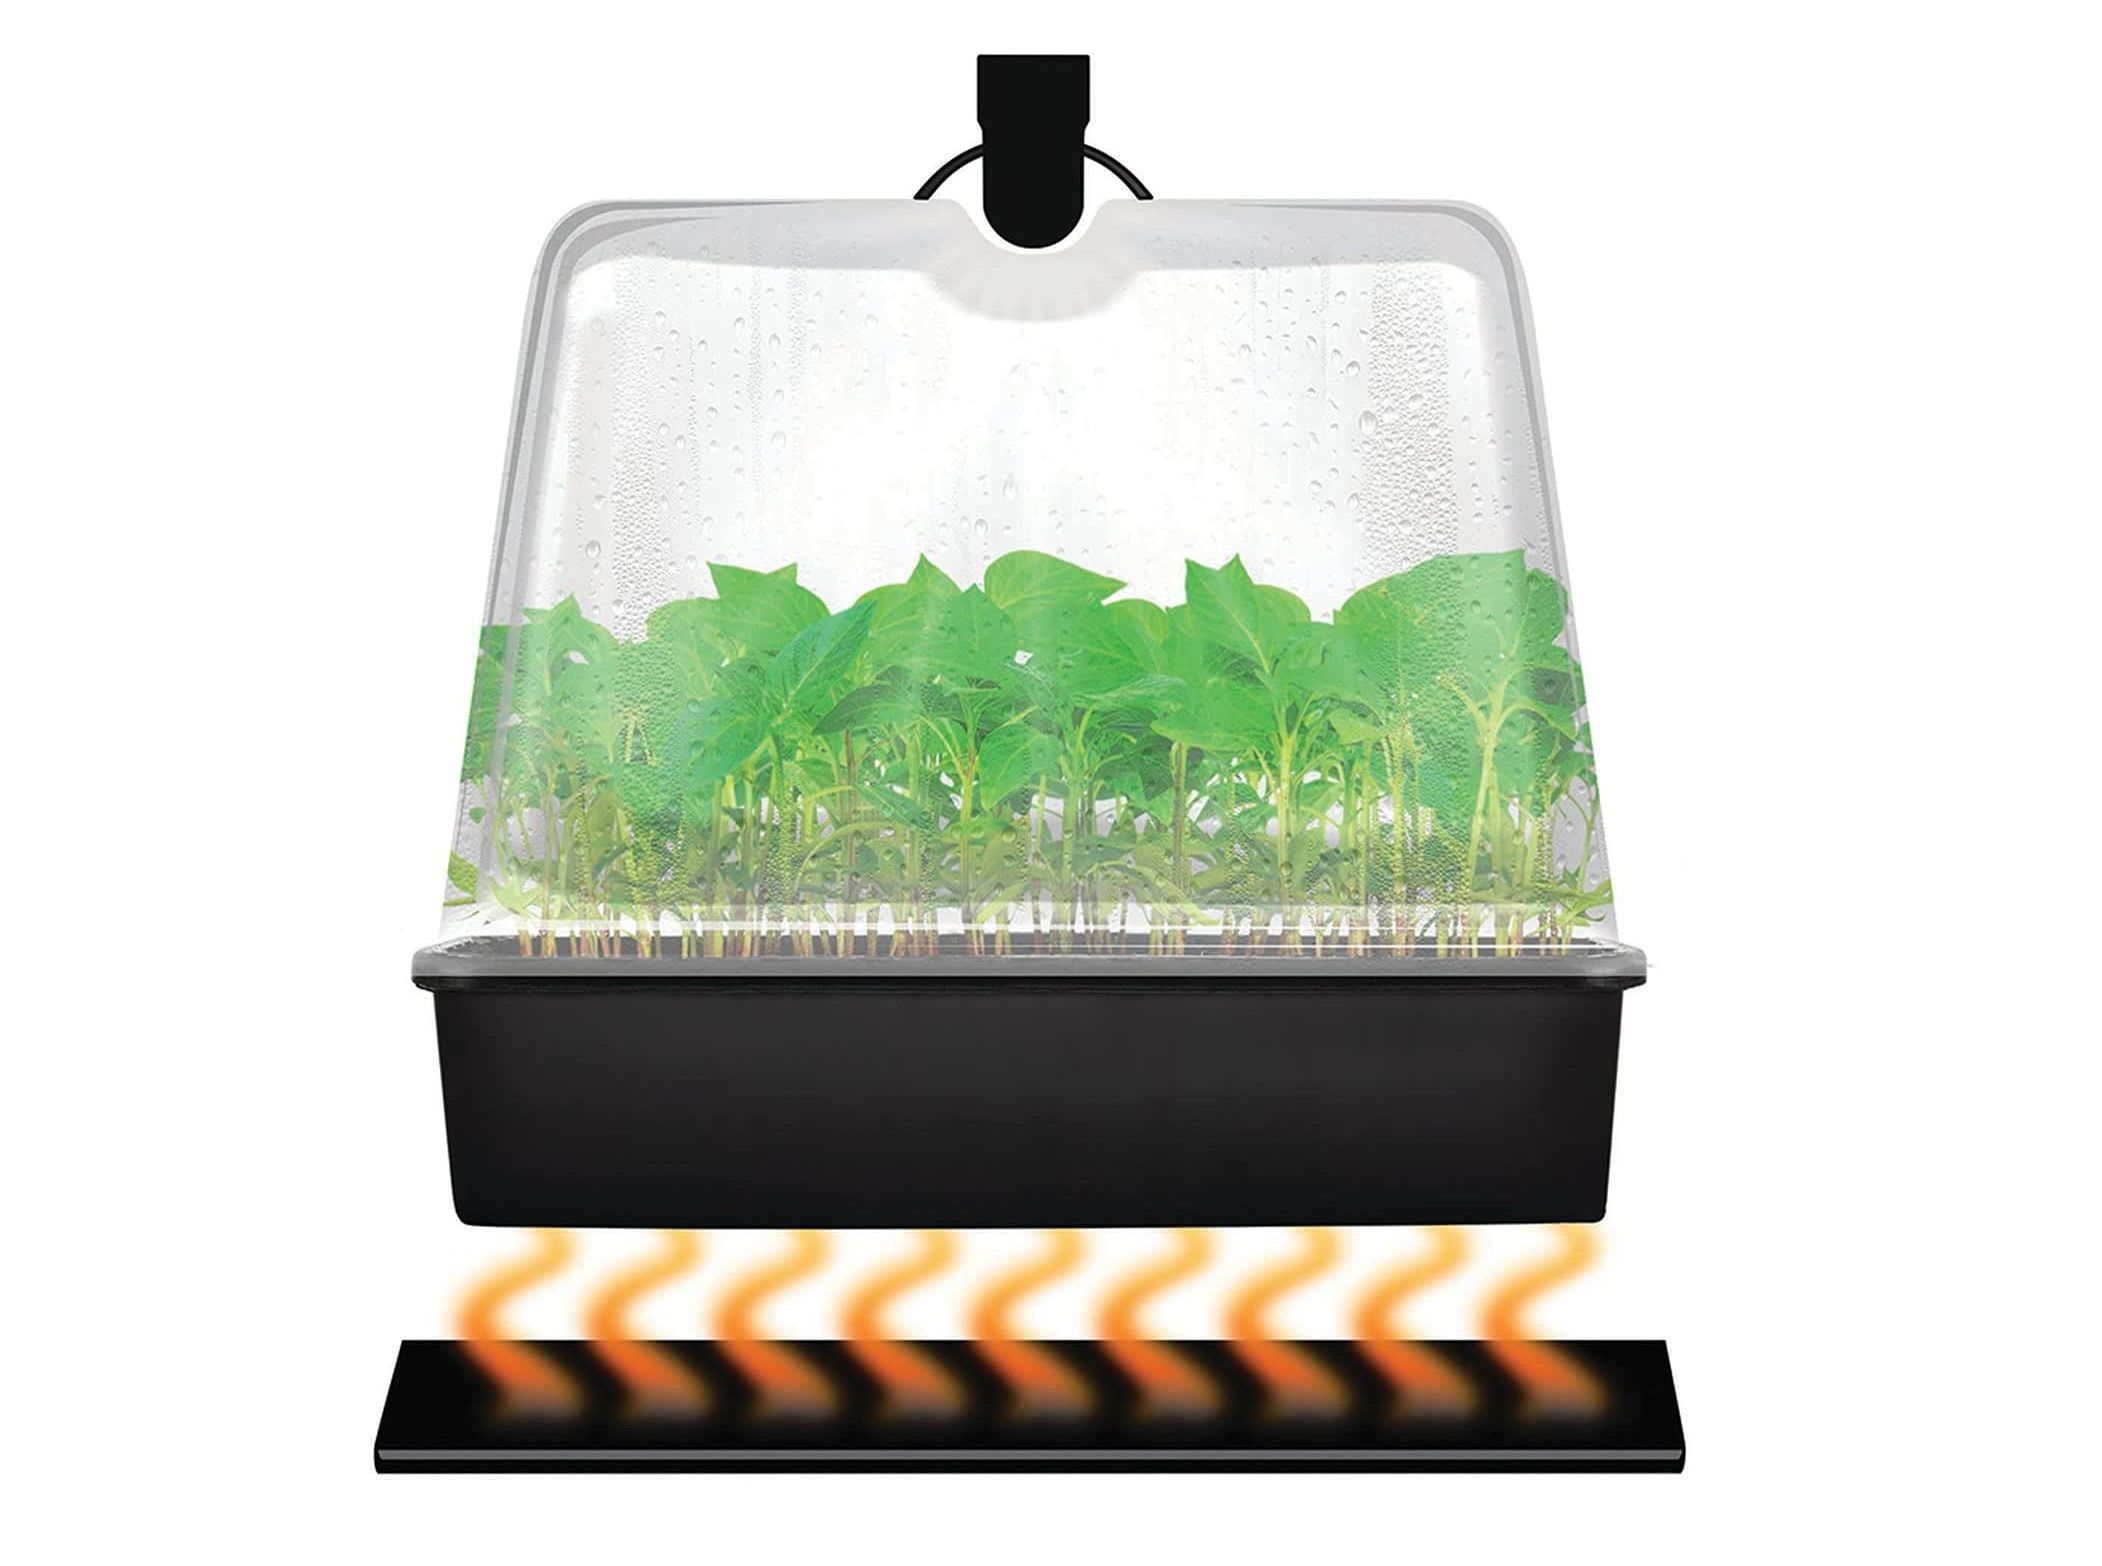 the super sprouter premium heated propagation kit heated seedlings